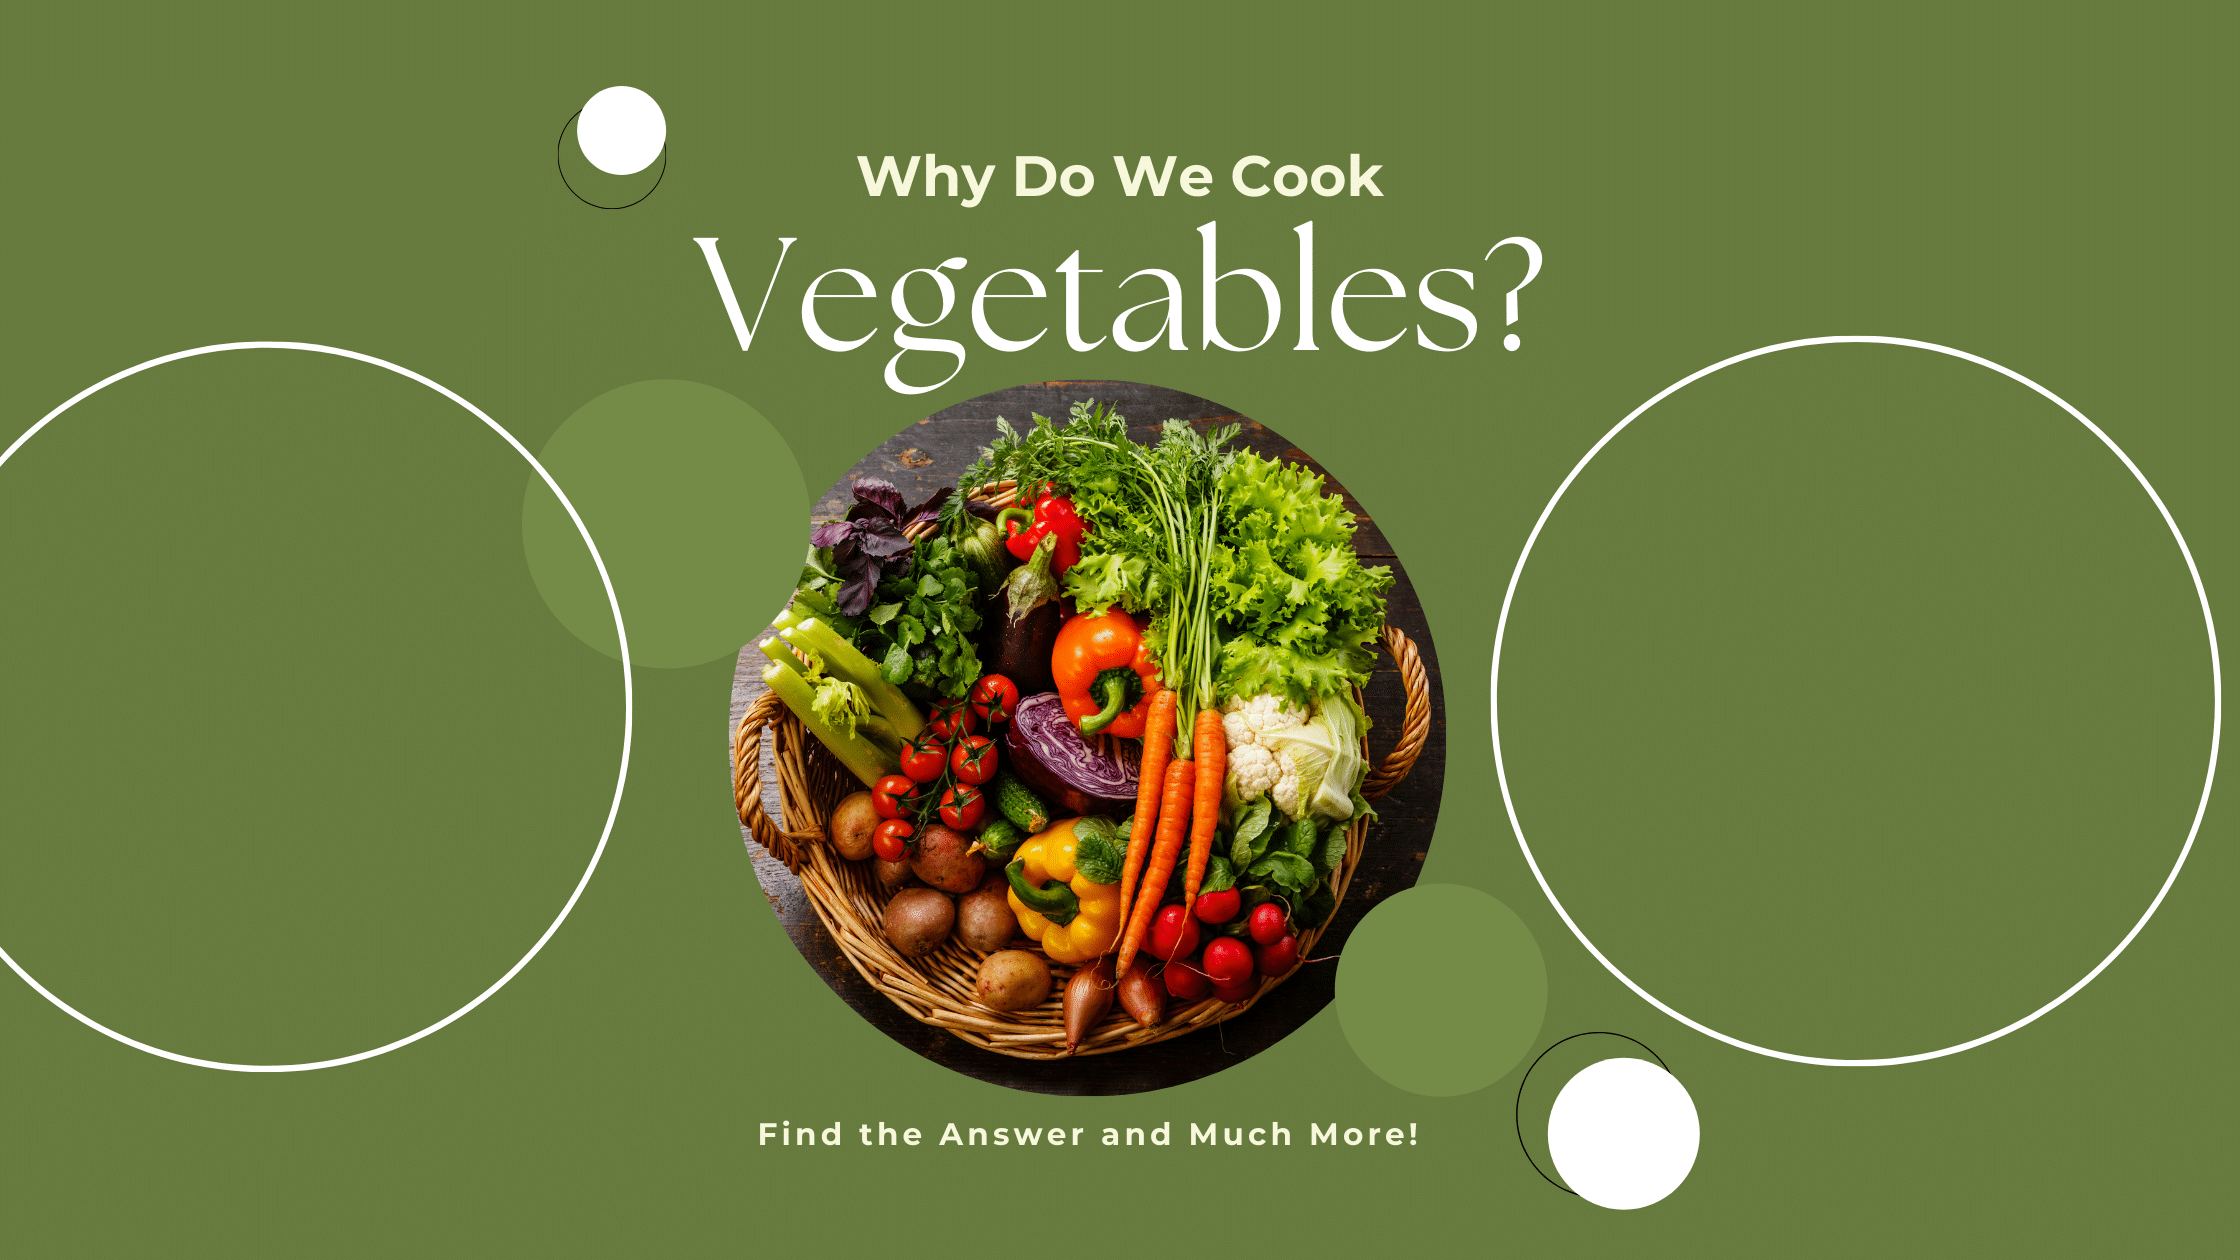 Why do we cook vegetables